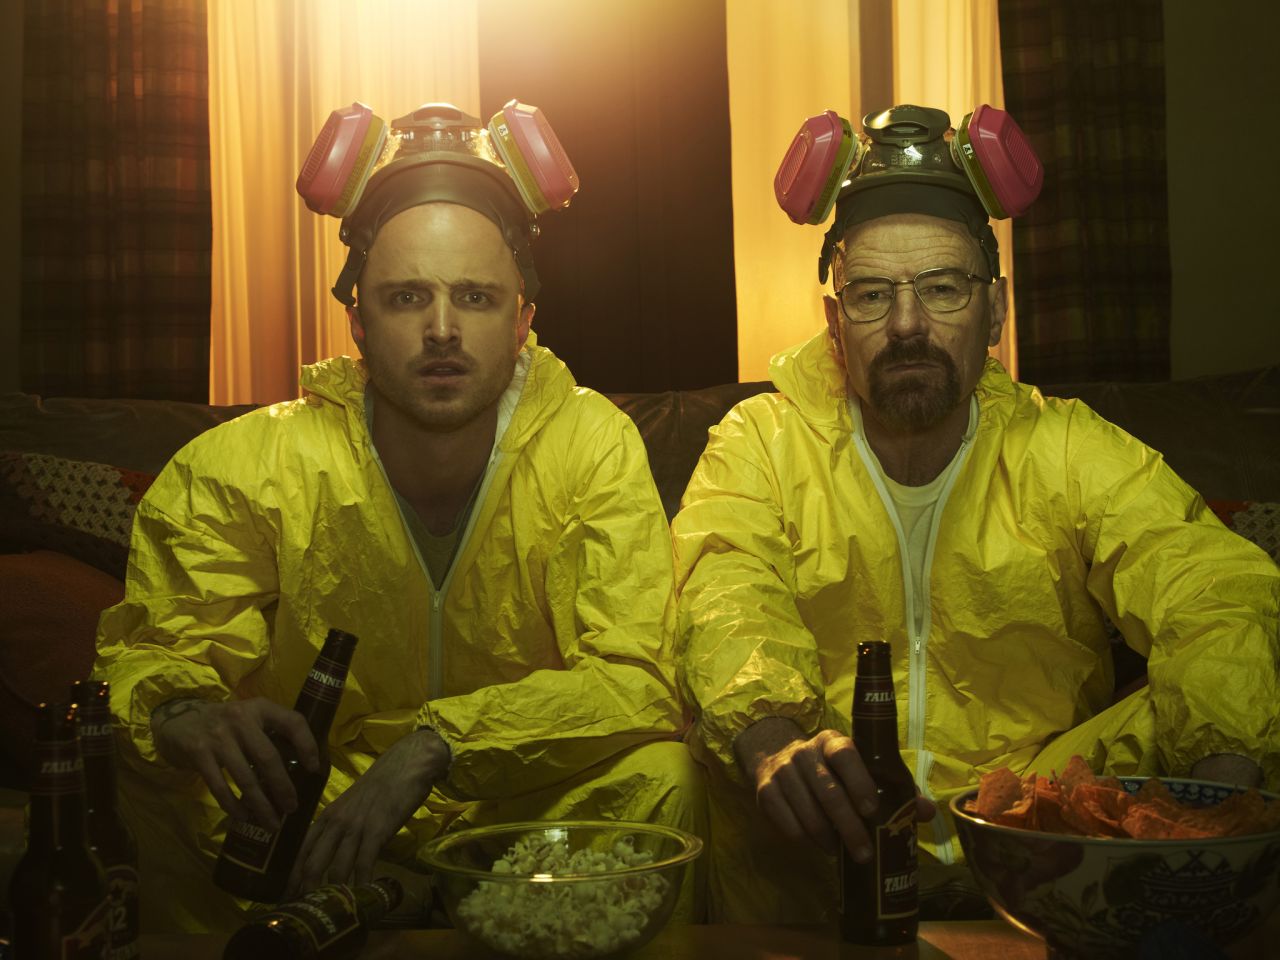 "Breaking Bad" may be history, but the show is still in the spotlight. After a final stretch of Emmy wins in August, the series, which starred Bryan Cranston, right, and Aaron Paul, is now under contention because of action figures based on the drama. Here are some indelible scenes from the past five seasons that put "Breaking Bad" on the map: (SPOILER ALERT: Read no further if you don't want plot points revealed).